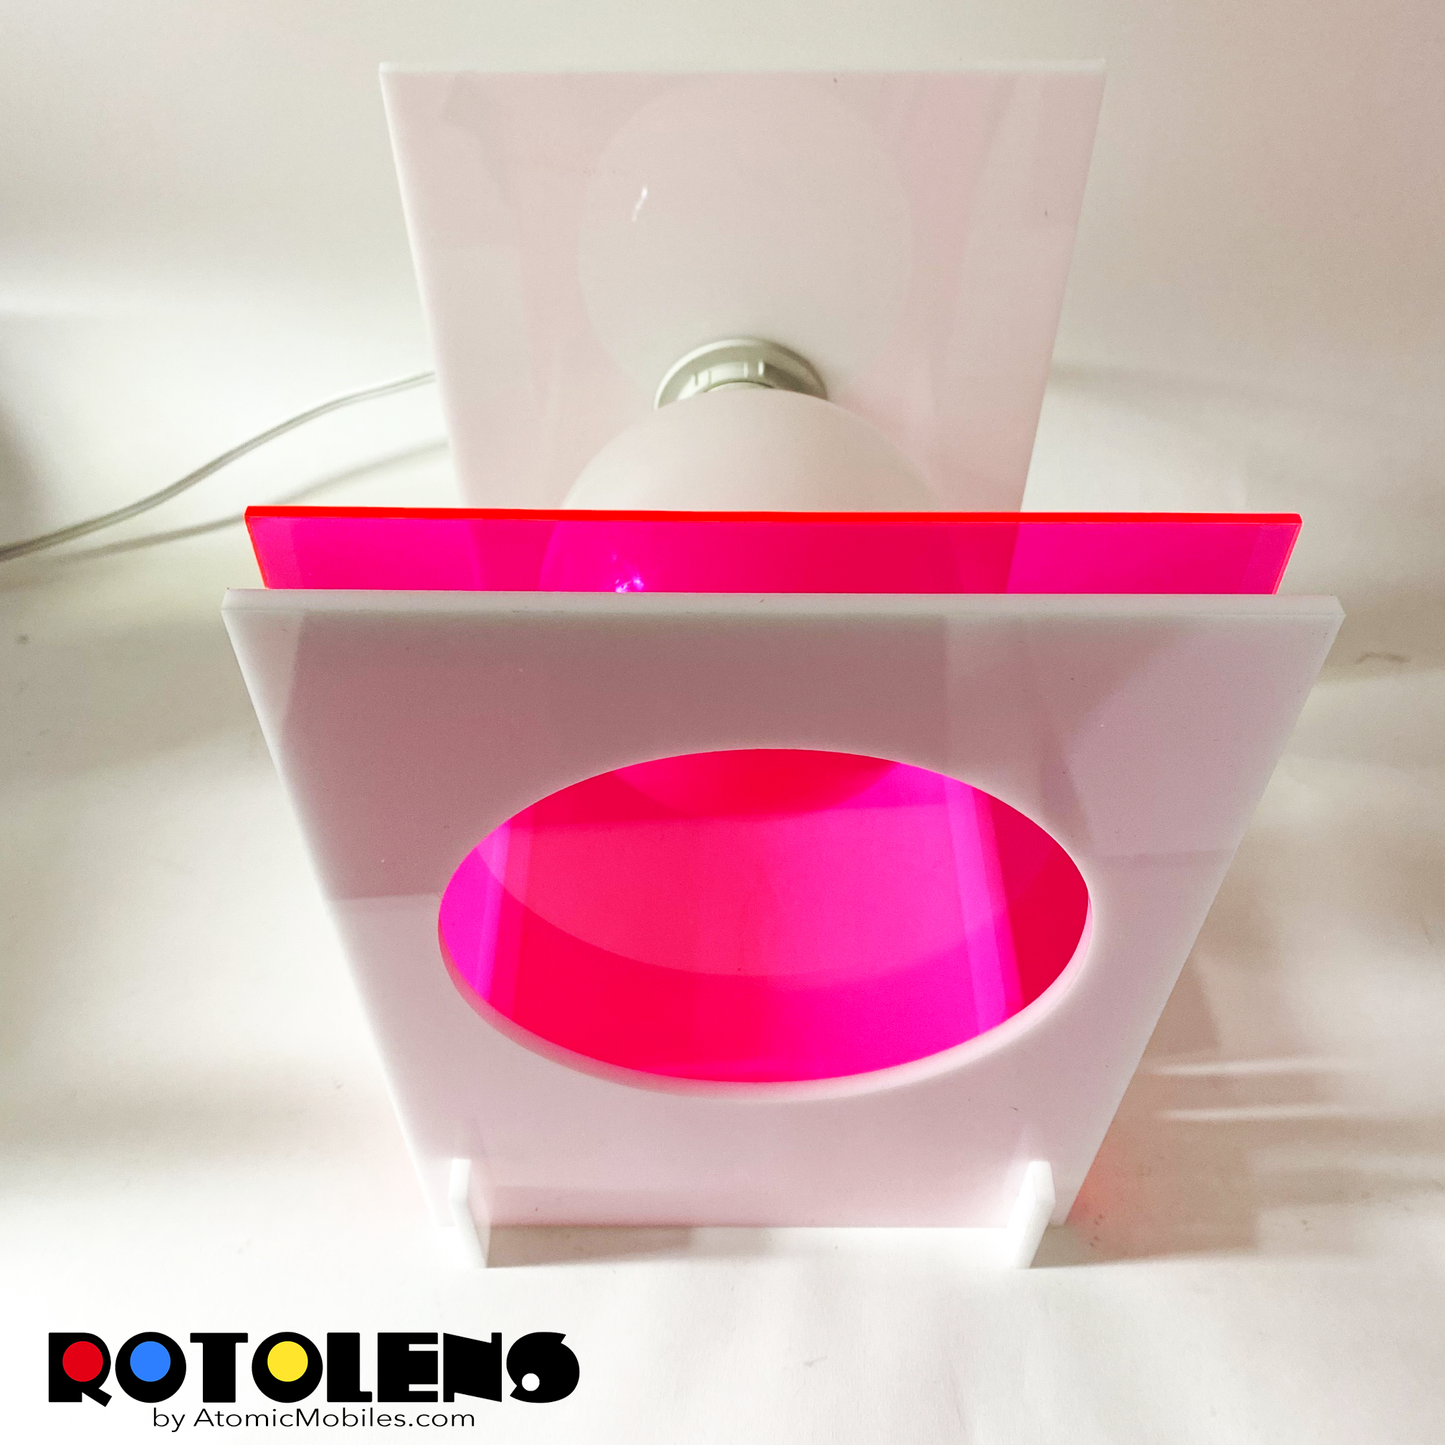 ROTOLENS Space Age Art Lamp